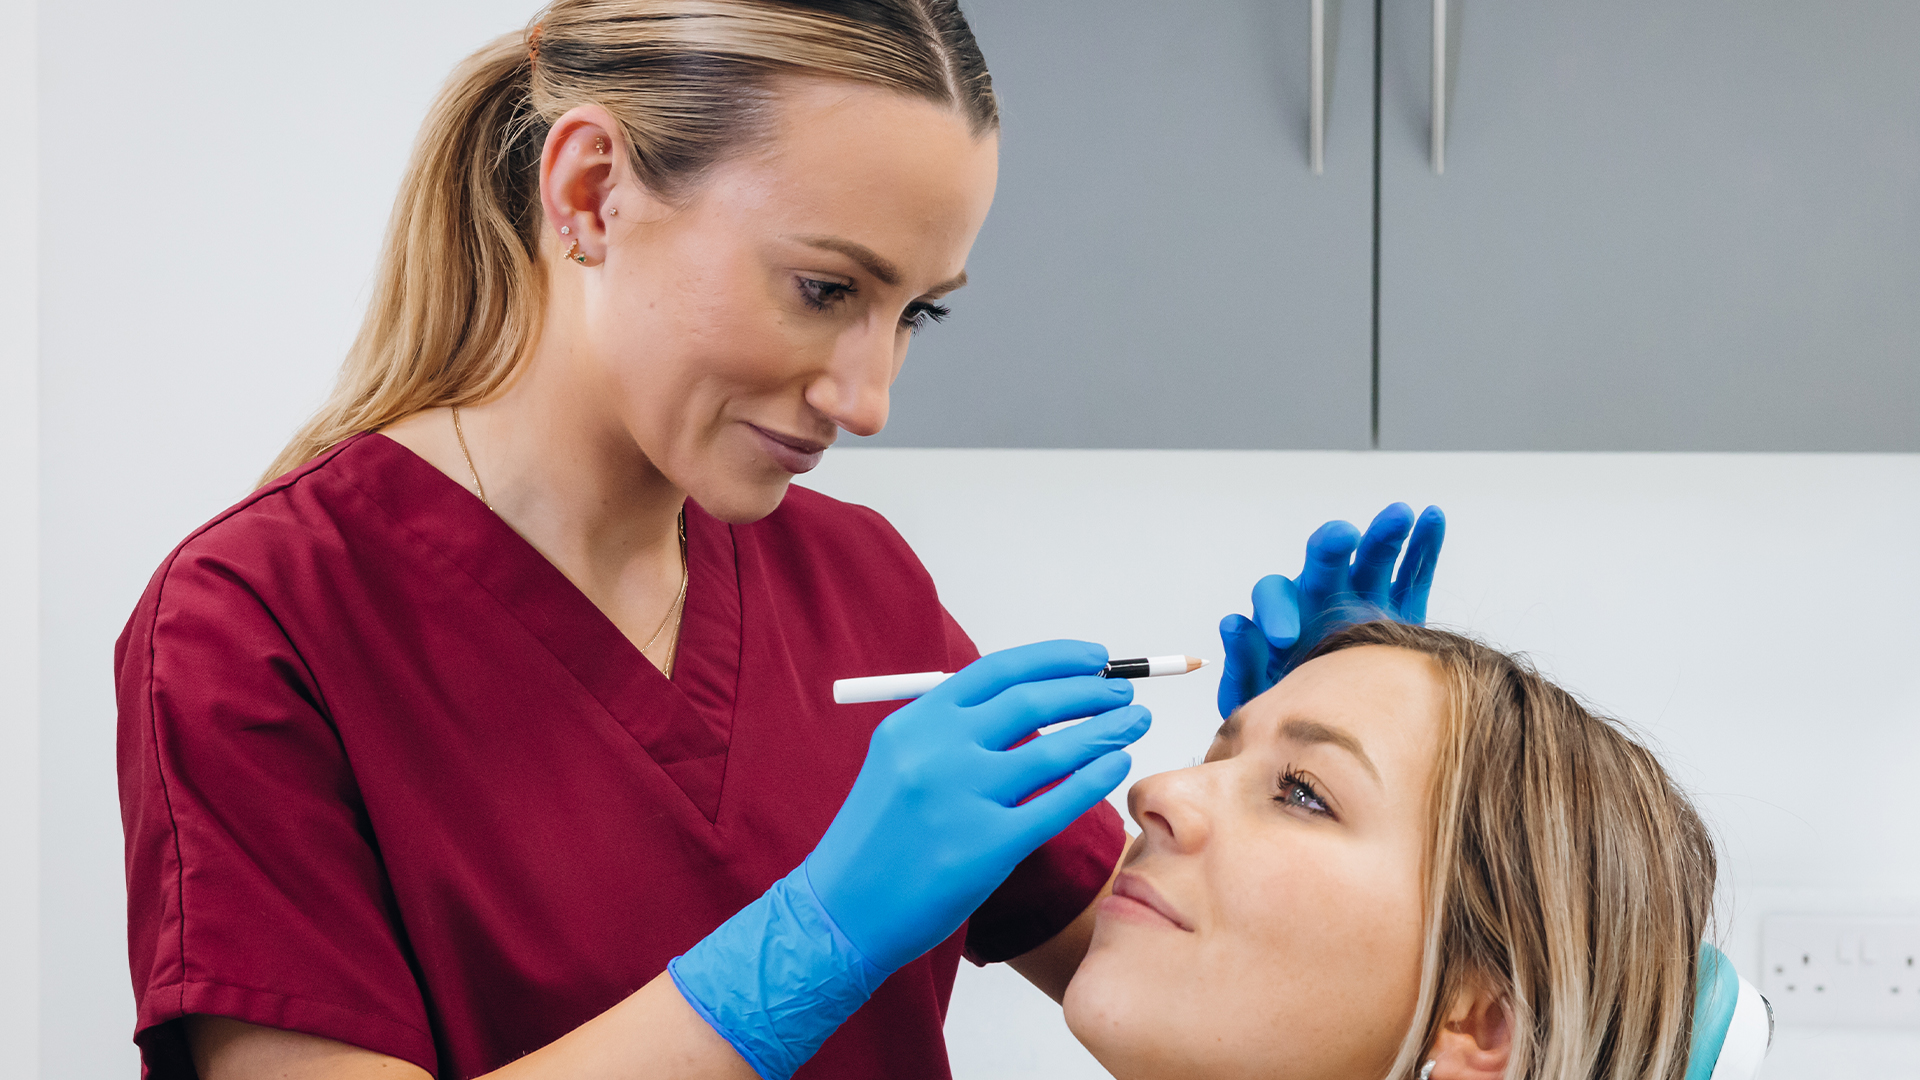 A female clinician wearing maroon scrubs and blue latex gloves using a white pencil on a female patients face